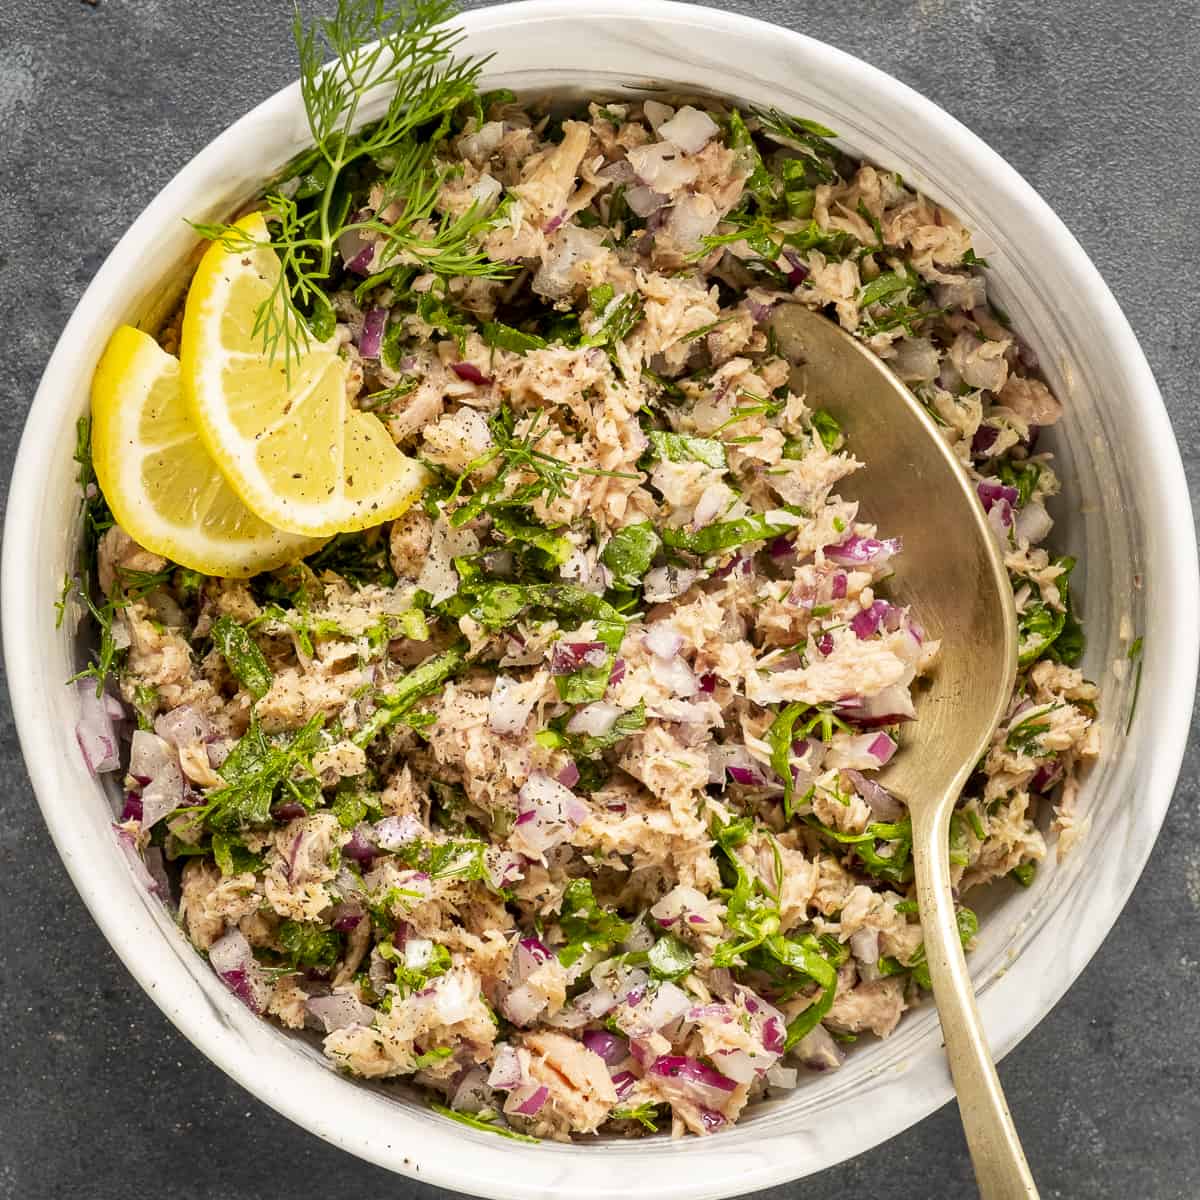 https://www.giverecipe.com/wp-content/uploads/2017/08/Healthy-tuna-salad-without-mayo.jpg